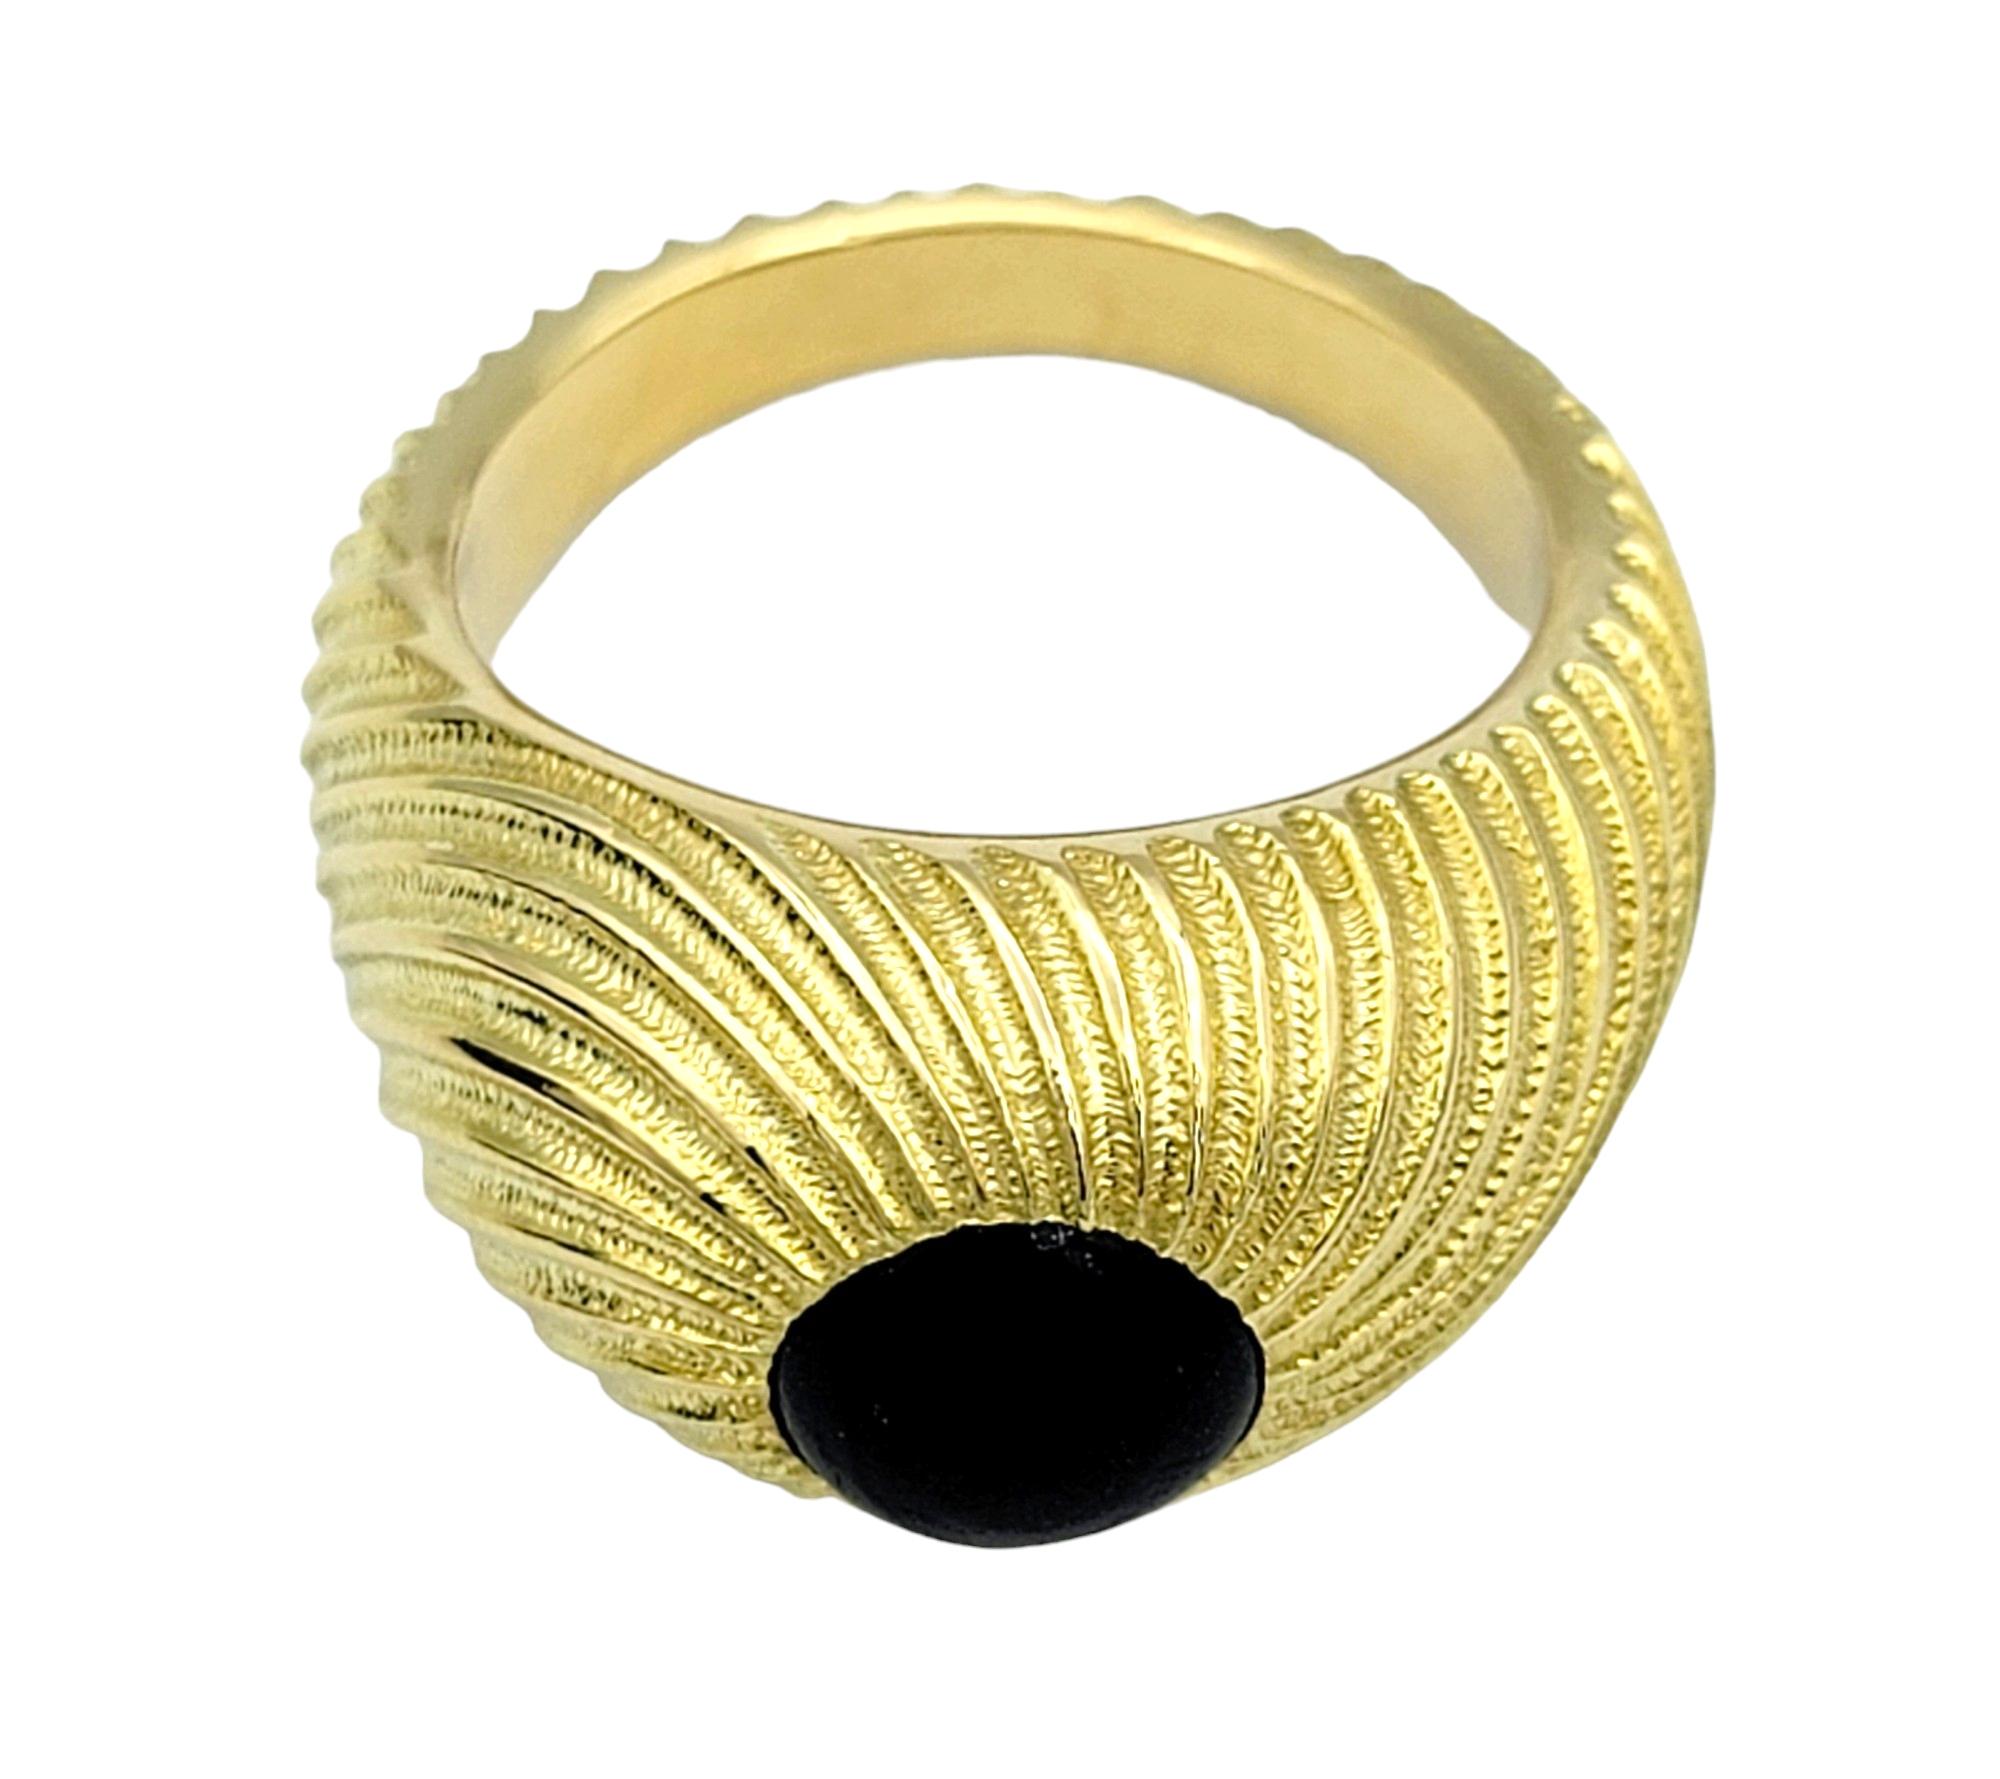 Tiffany & Co. Schlumberger Shrimp Style Black Onyx Ring in 18 Karat Yellow Gold In Good Condition For Sale In Scottsdale, AZ